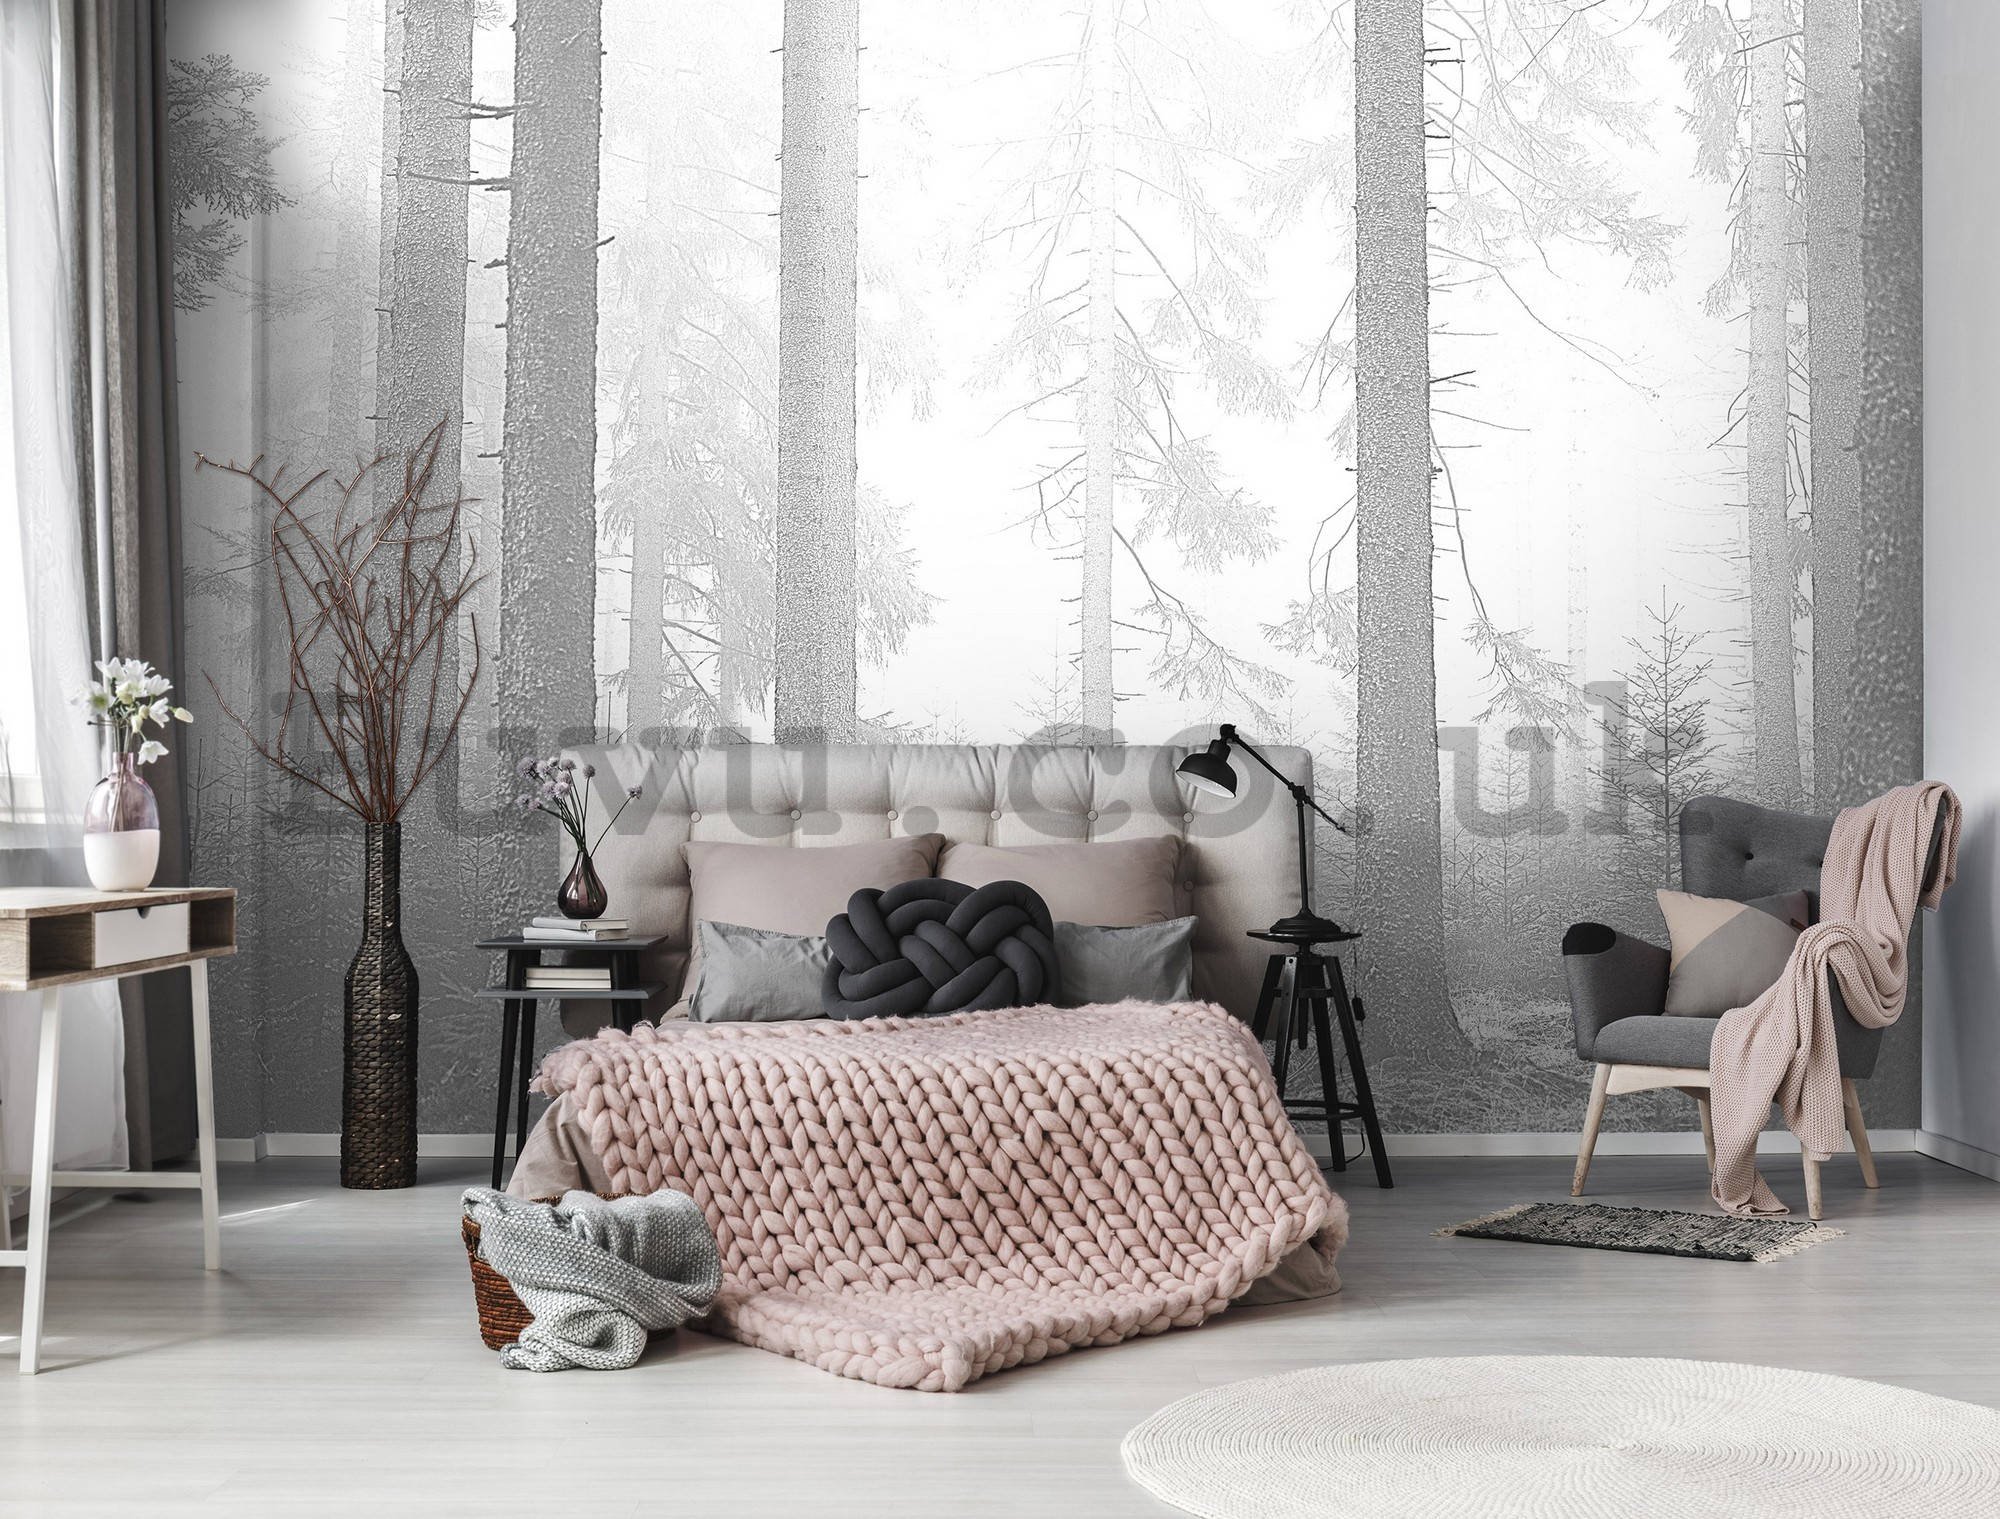 Wall mural vlies: Black and white forest (3) - 254x184 cm